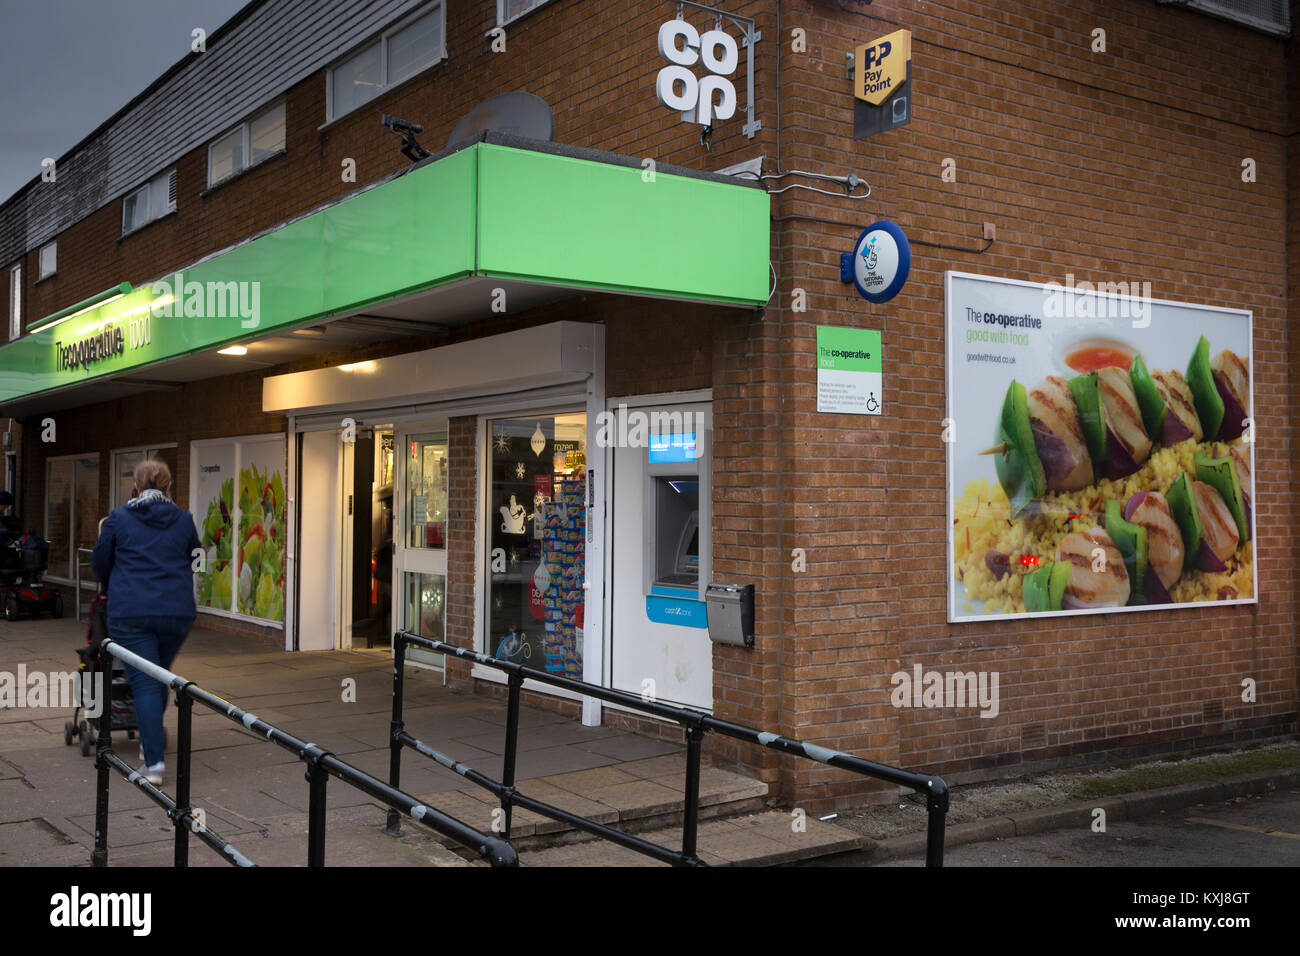 UK, England, Cheshire, Stockport, Bramhall, Dairyground Road, Co-op food store, with new cloverleaf logo sign Stock Photo